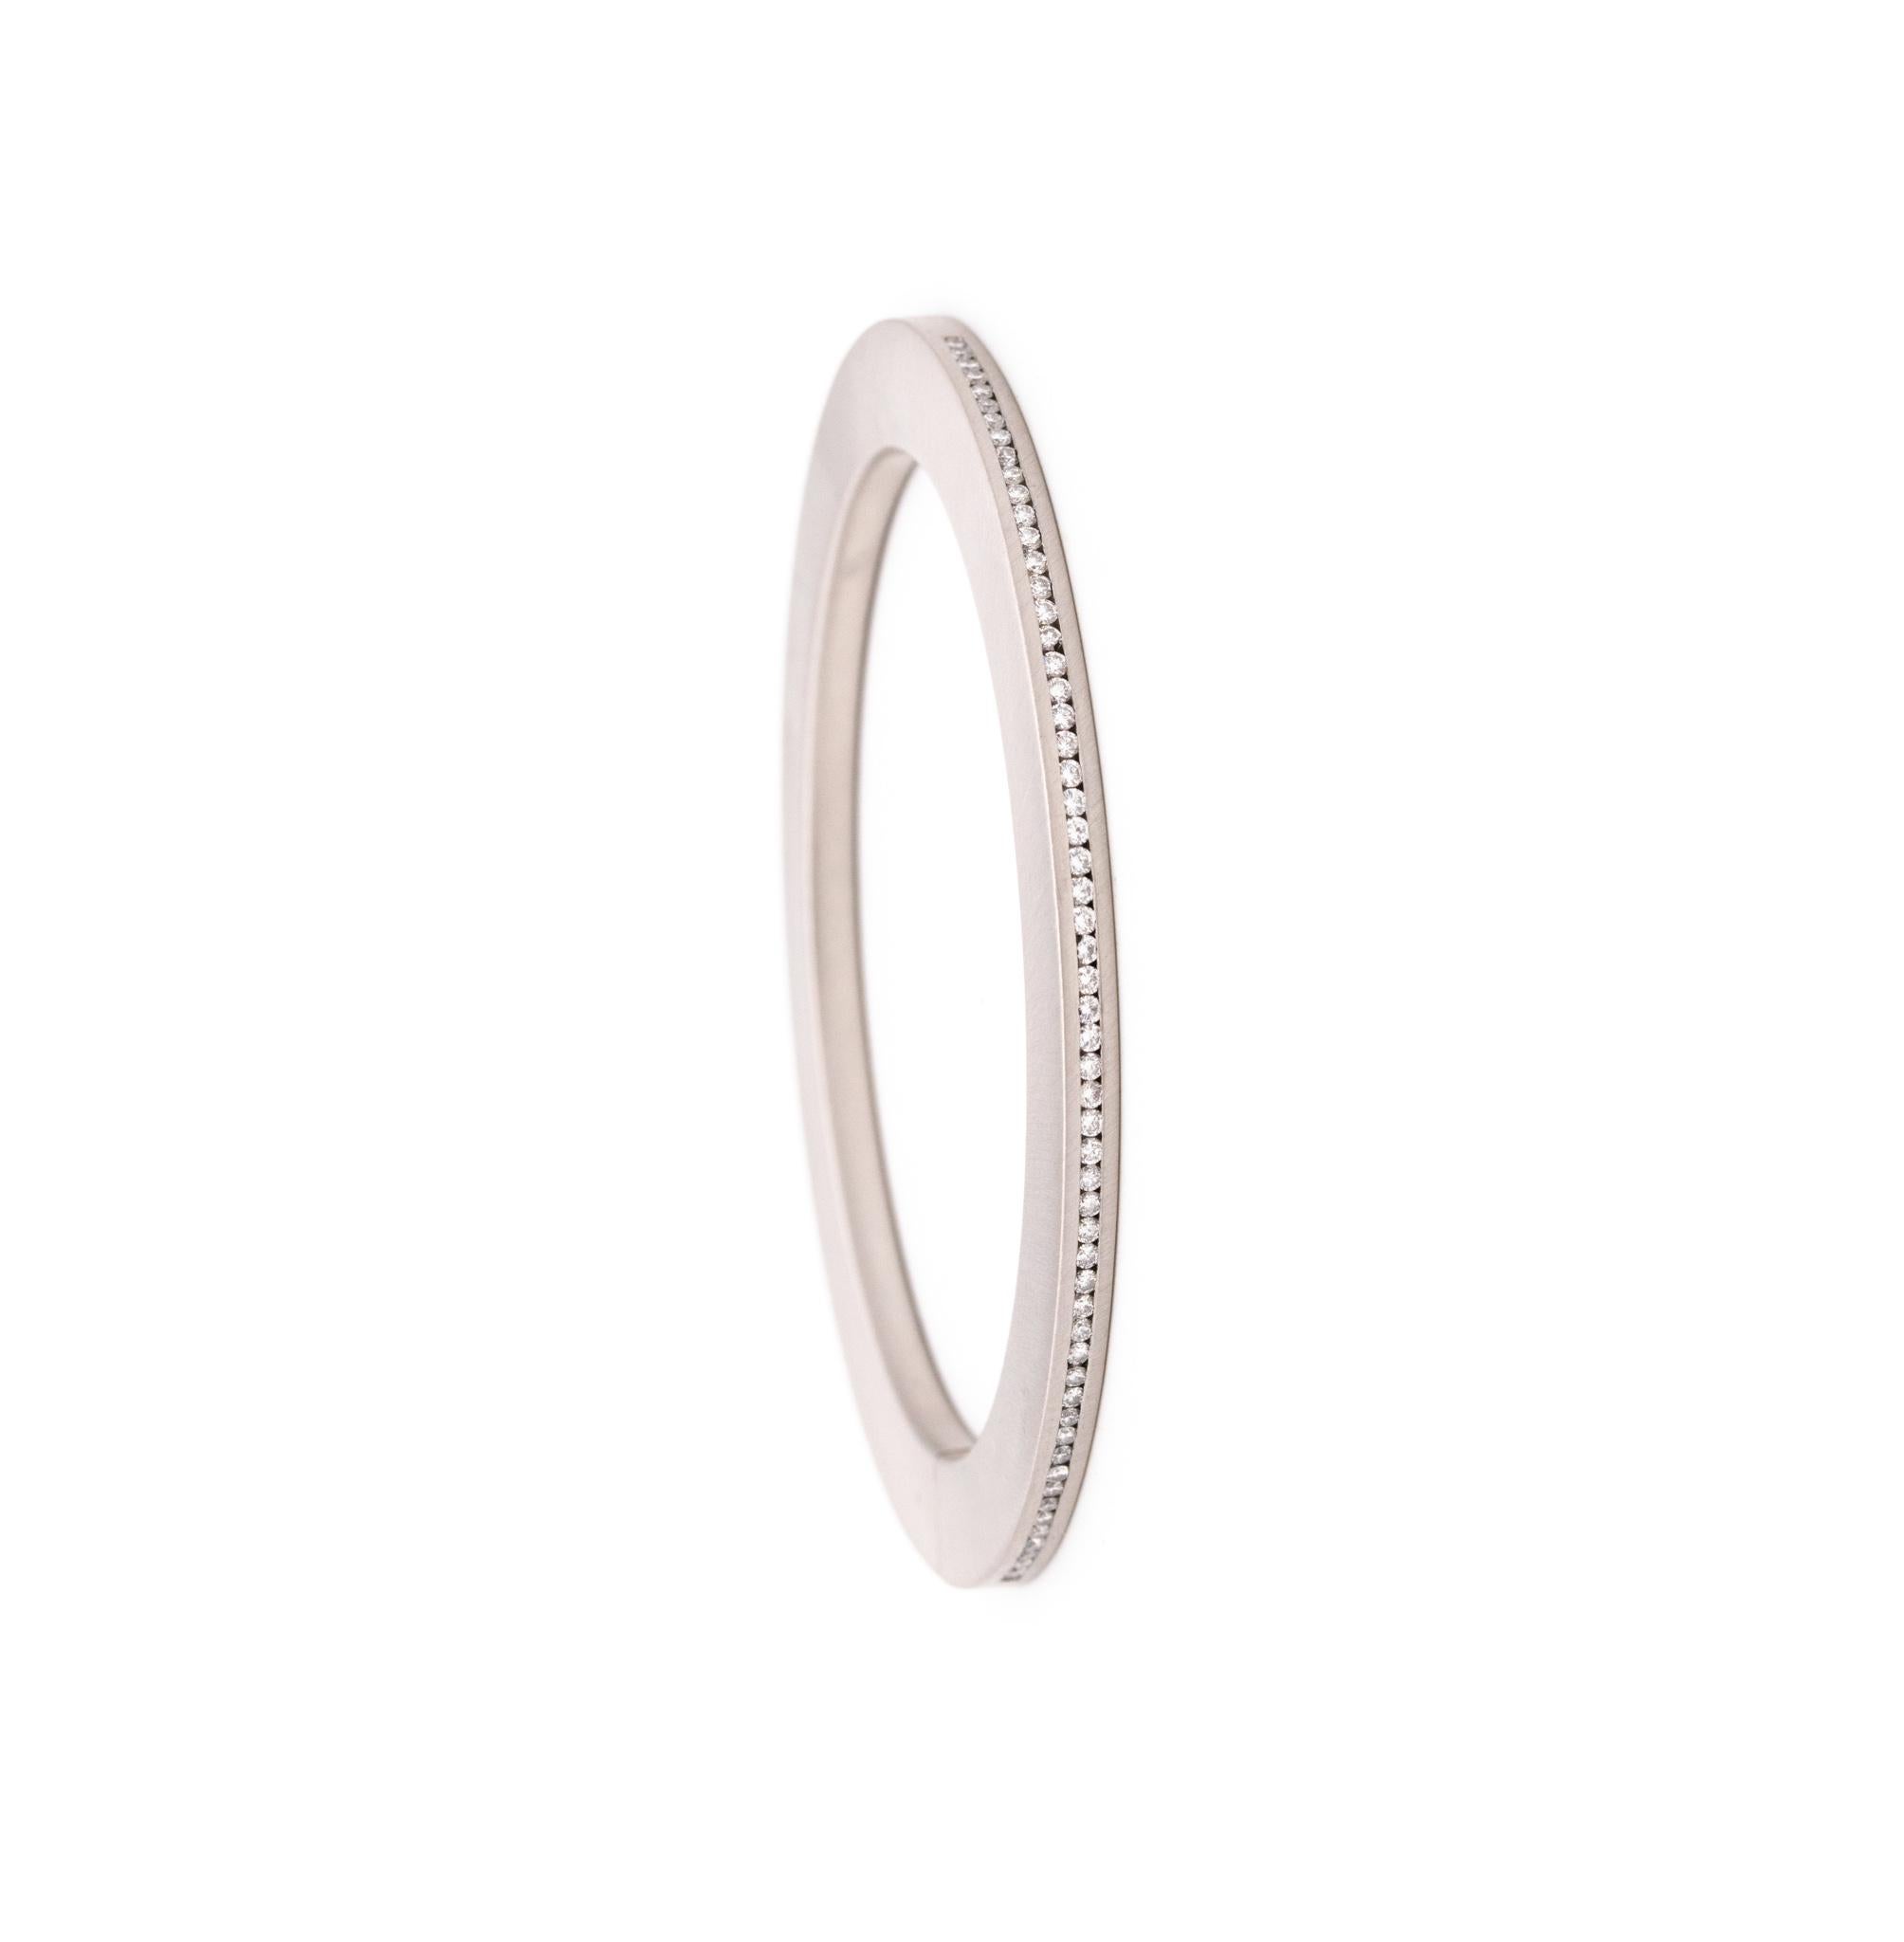 Bauhaus platinum bangle designed by Henrich & Denzel.

Very modern, sleek and contemporary bracelet, created by the German-Swiss jewelry designers of Henrich & Denzel. This gorgeous bangle bracelet has been manufactured with impeccable details in